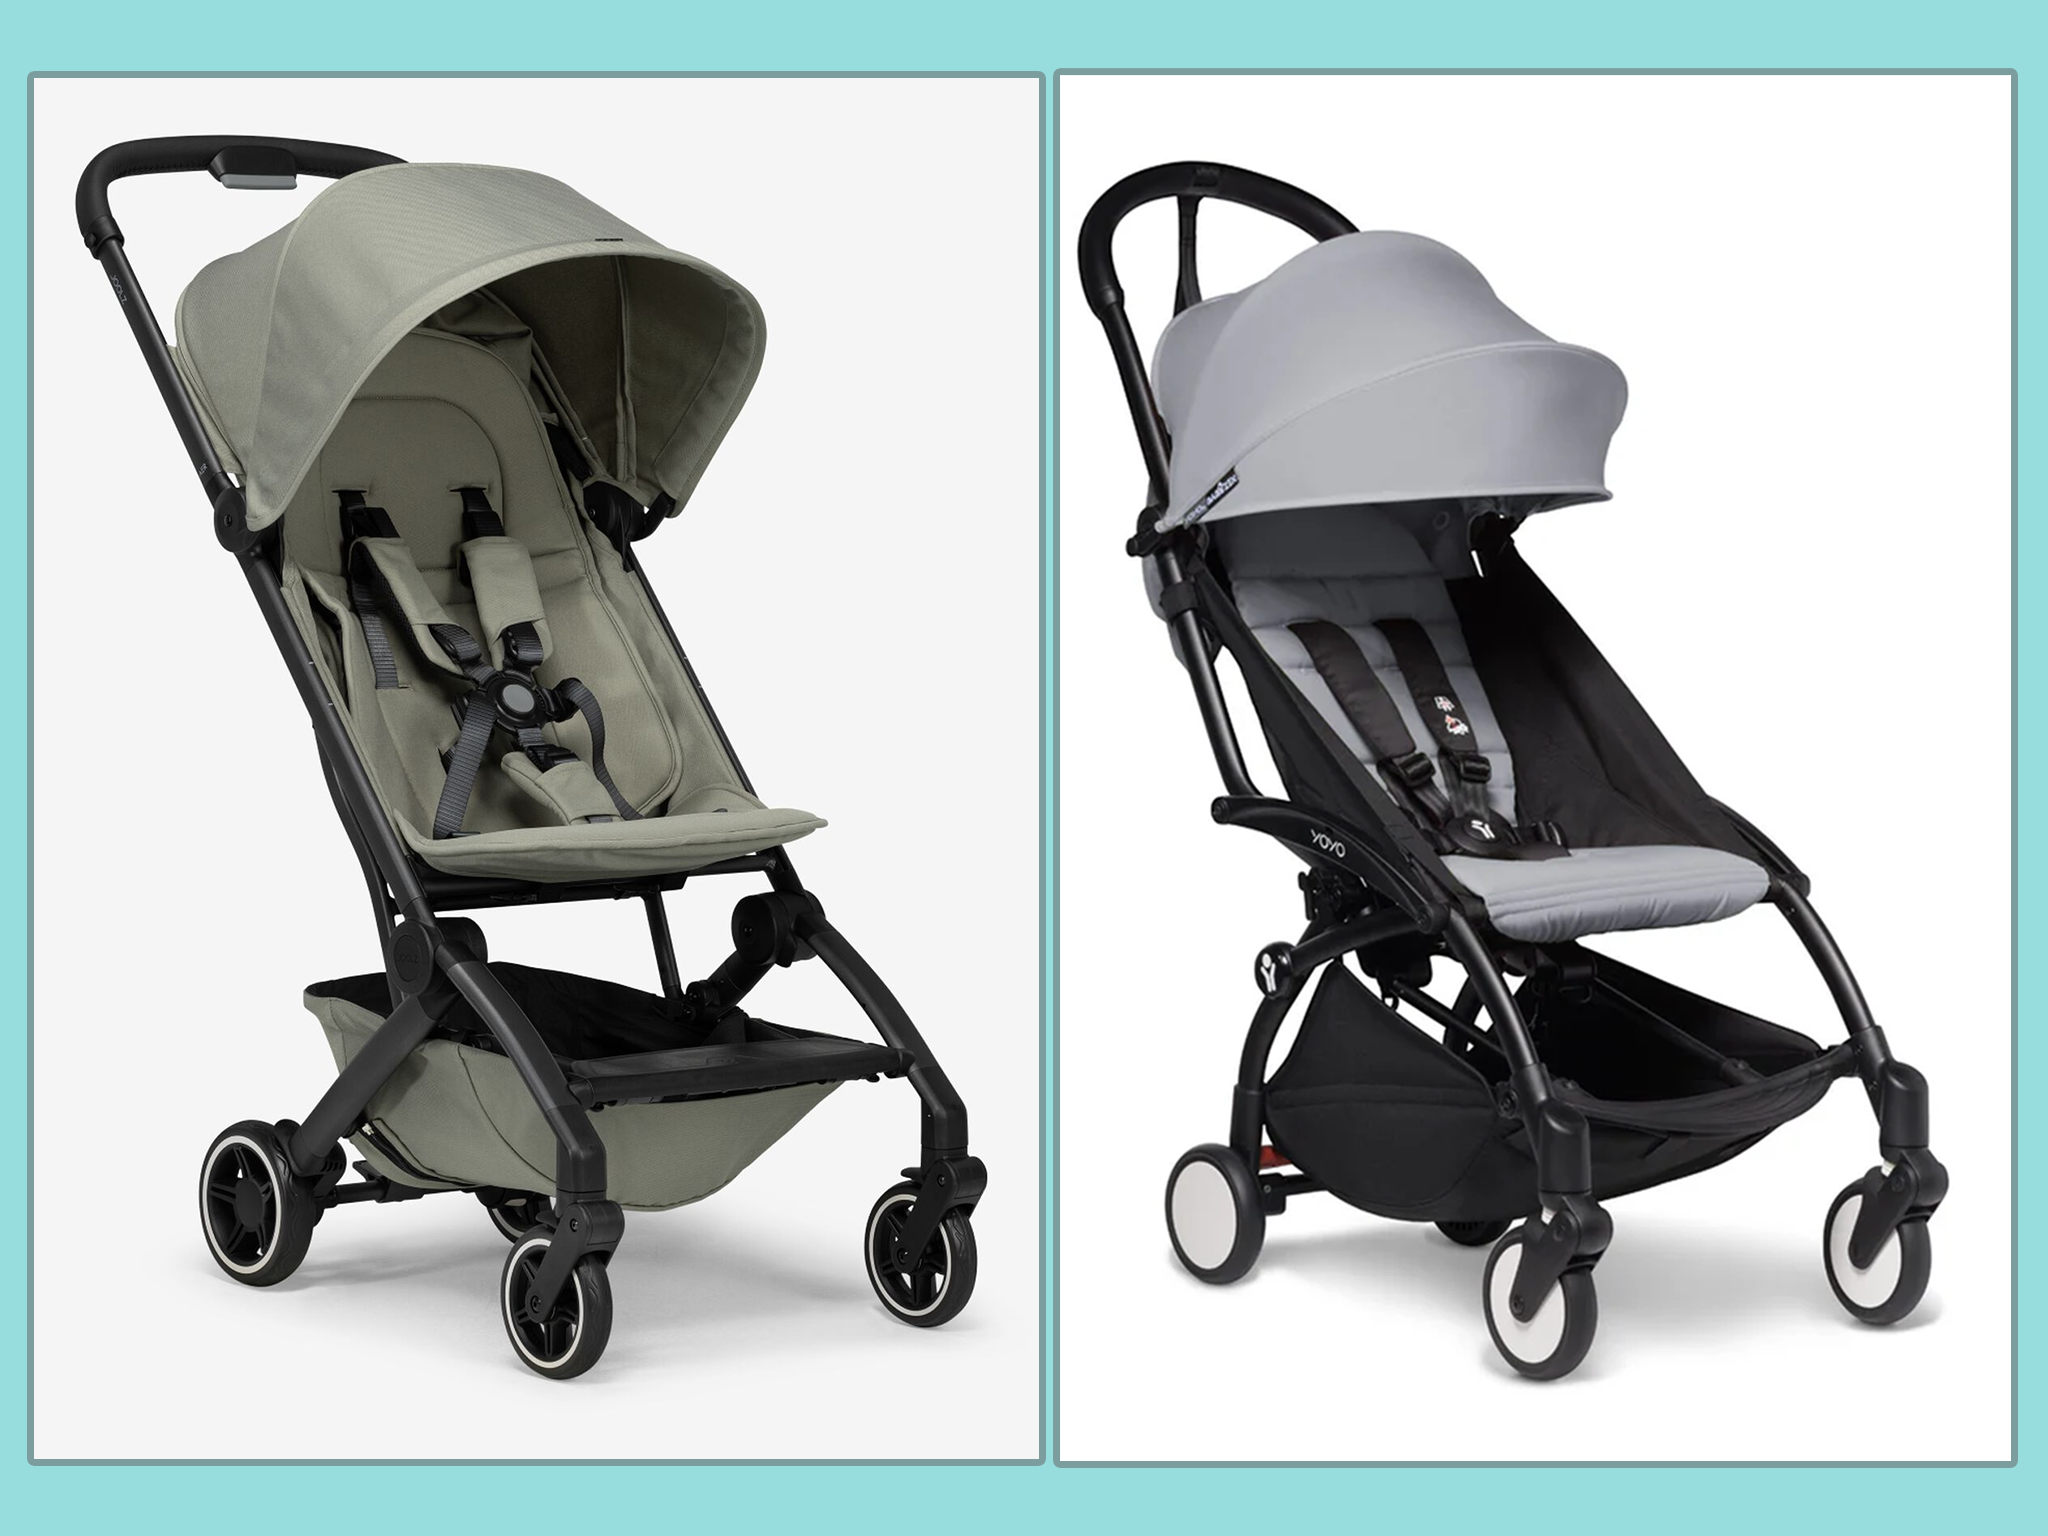 The Joolz aer+ and Babyzen yoyo are both travel buggies with style